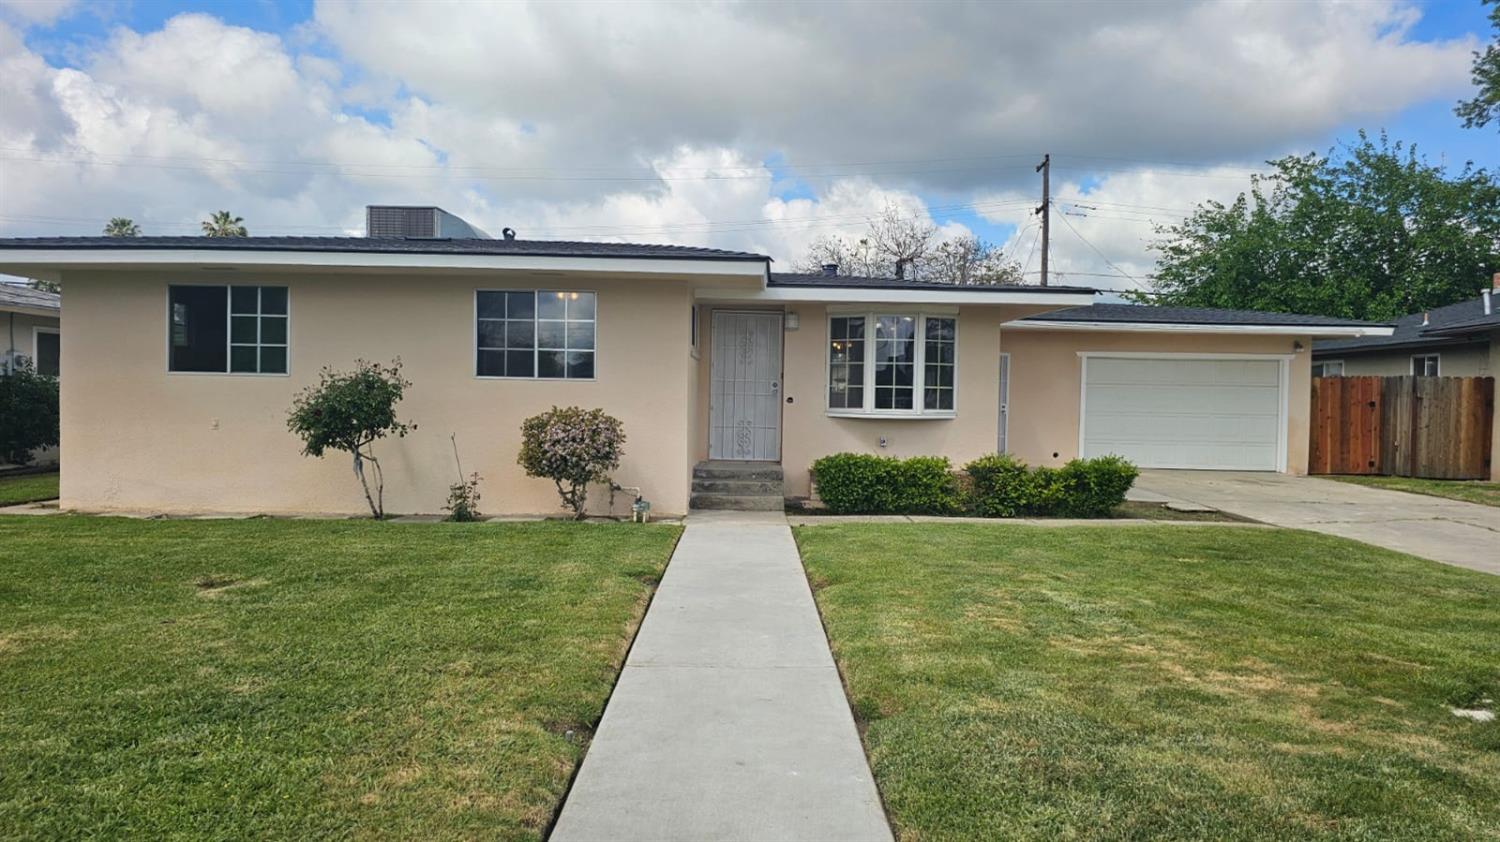 Photo of 704 Williams Ave in Madera, CA